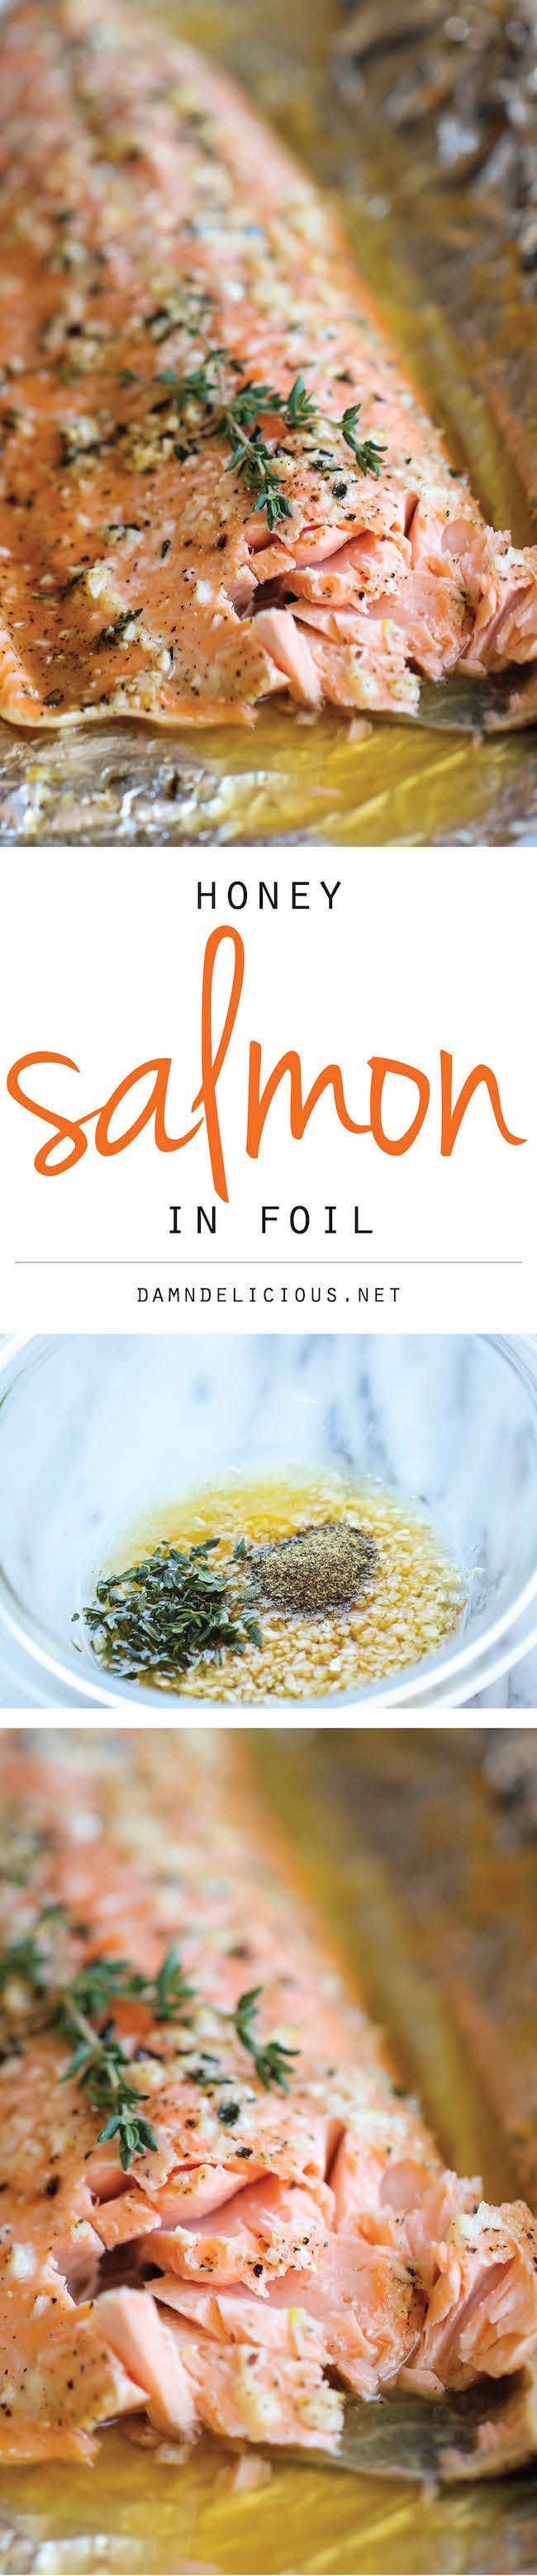 Honey Salmon in Foil – A no-fuss, super easy salmon dish thats baked in foil for the most tender, most flavorful salmon